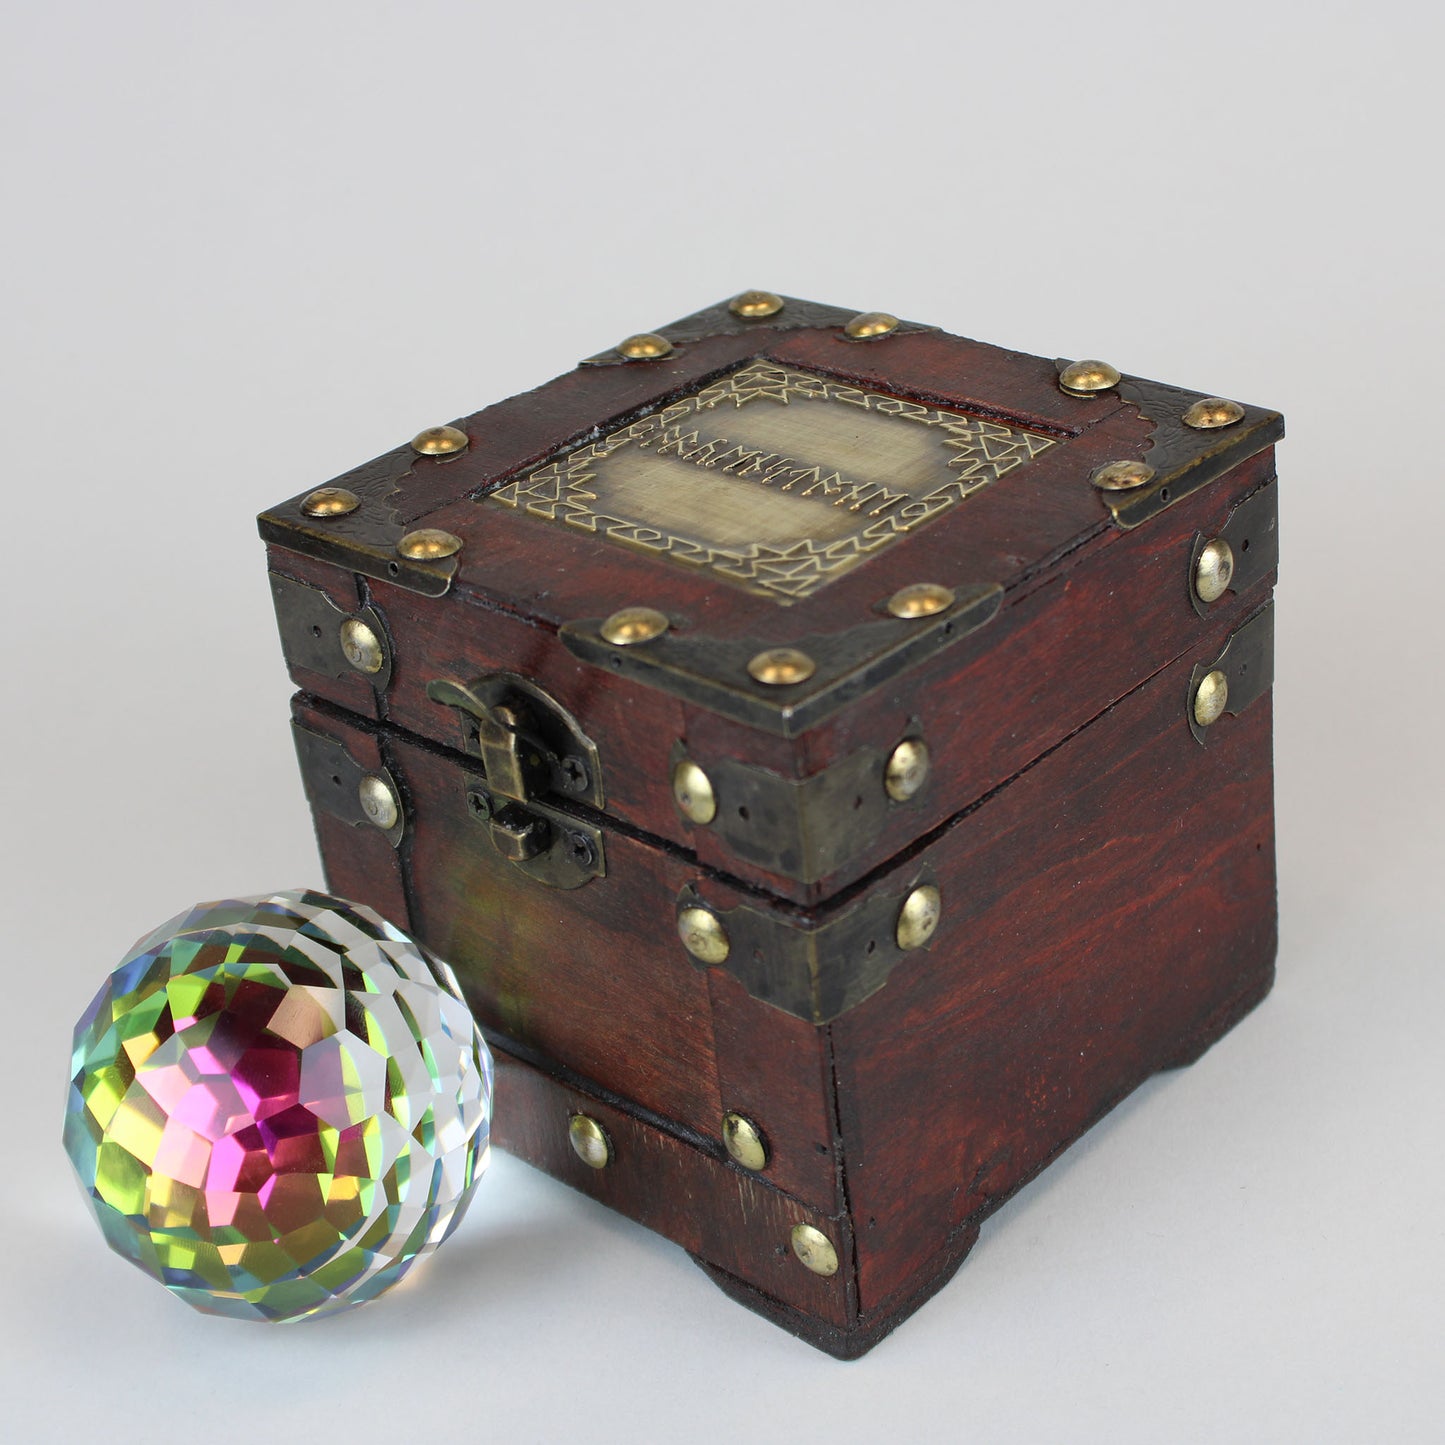 The Arkenstone™ Replica In Dwarven Treasure Box Lord of the Rings The Hobbit Thorin Oakenshield